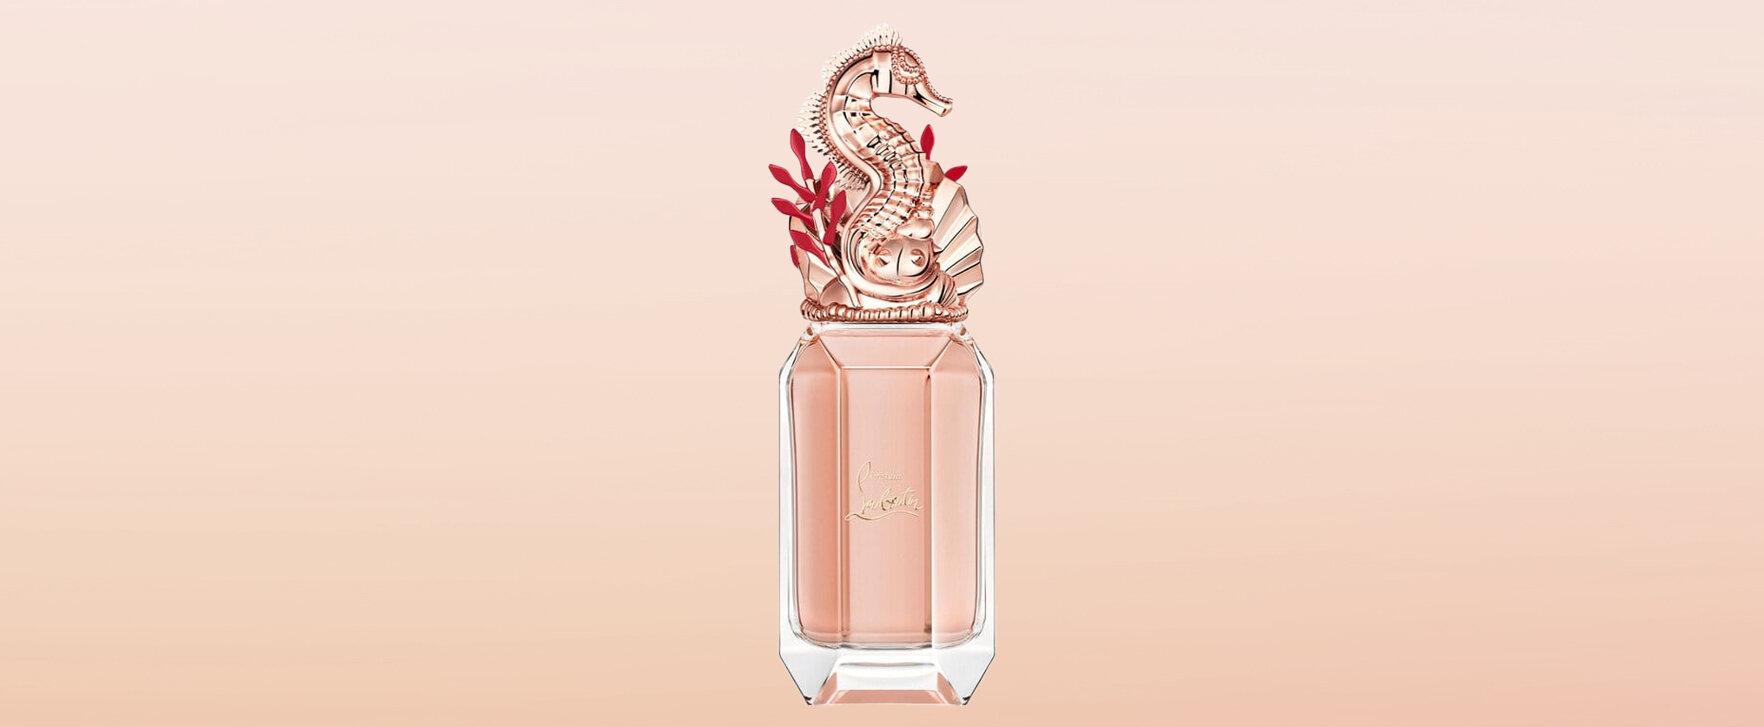 A Fragrance Journey to the Underwater World: "Loubihorse" by Christian Louboutin 